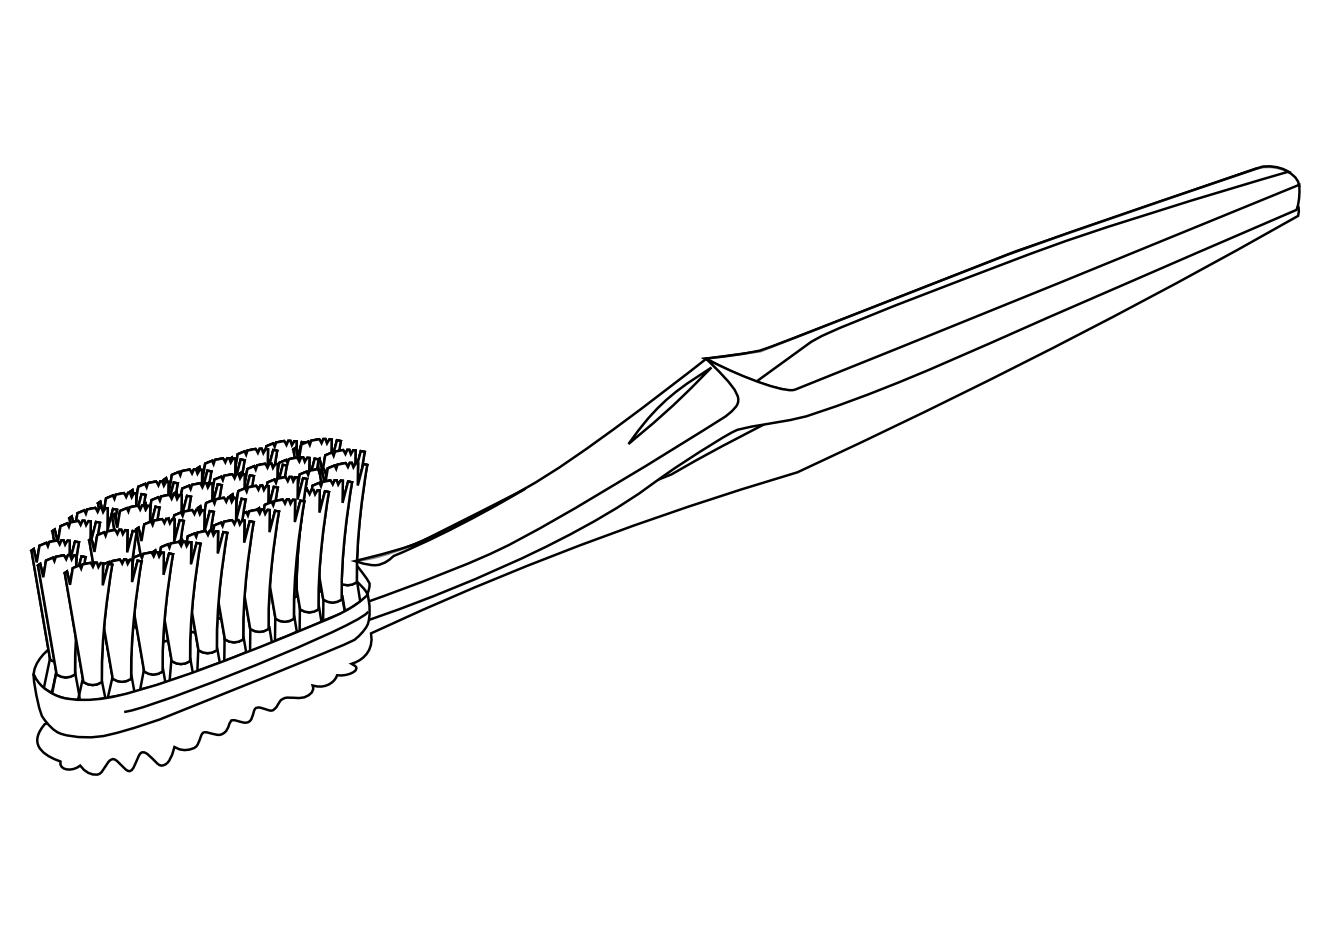 Food Toothbrush Toothbrush Black White Line Art Scalable Vector